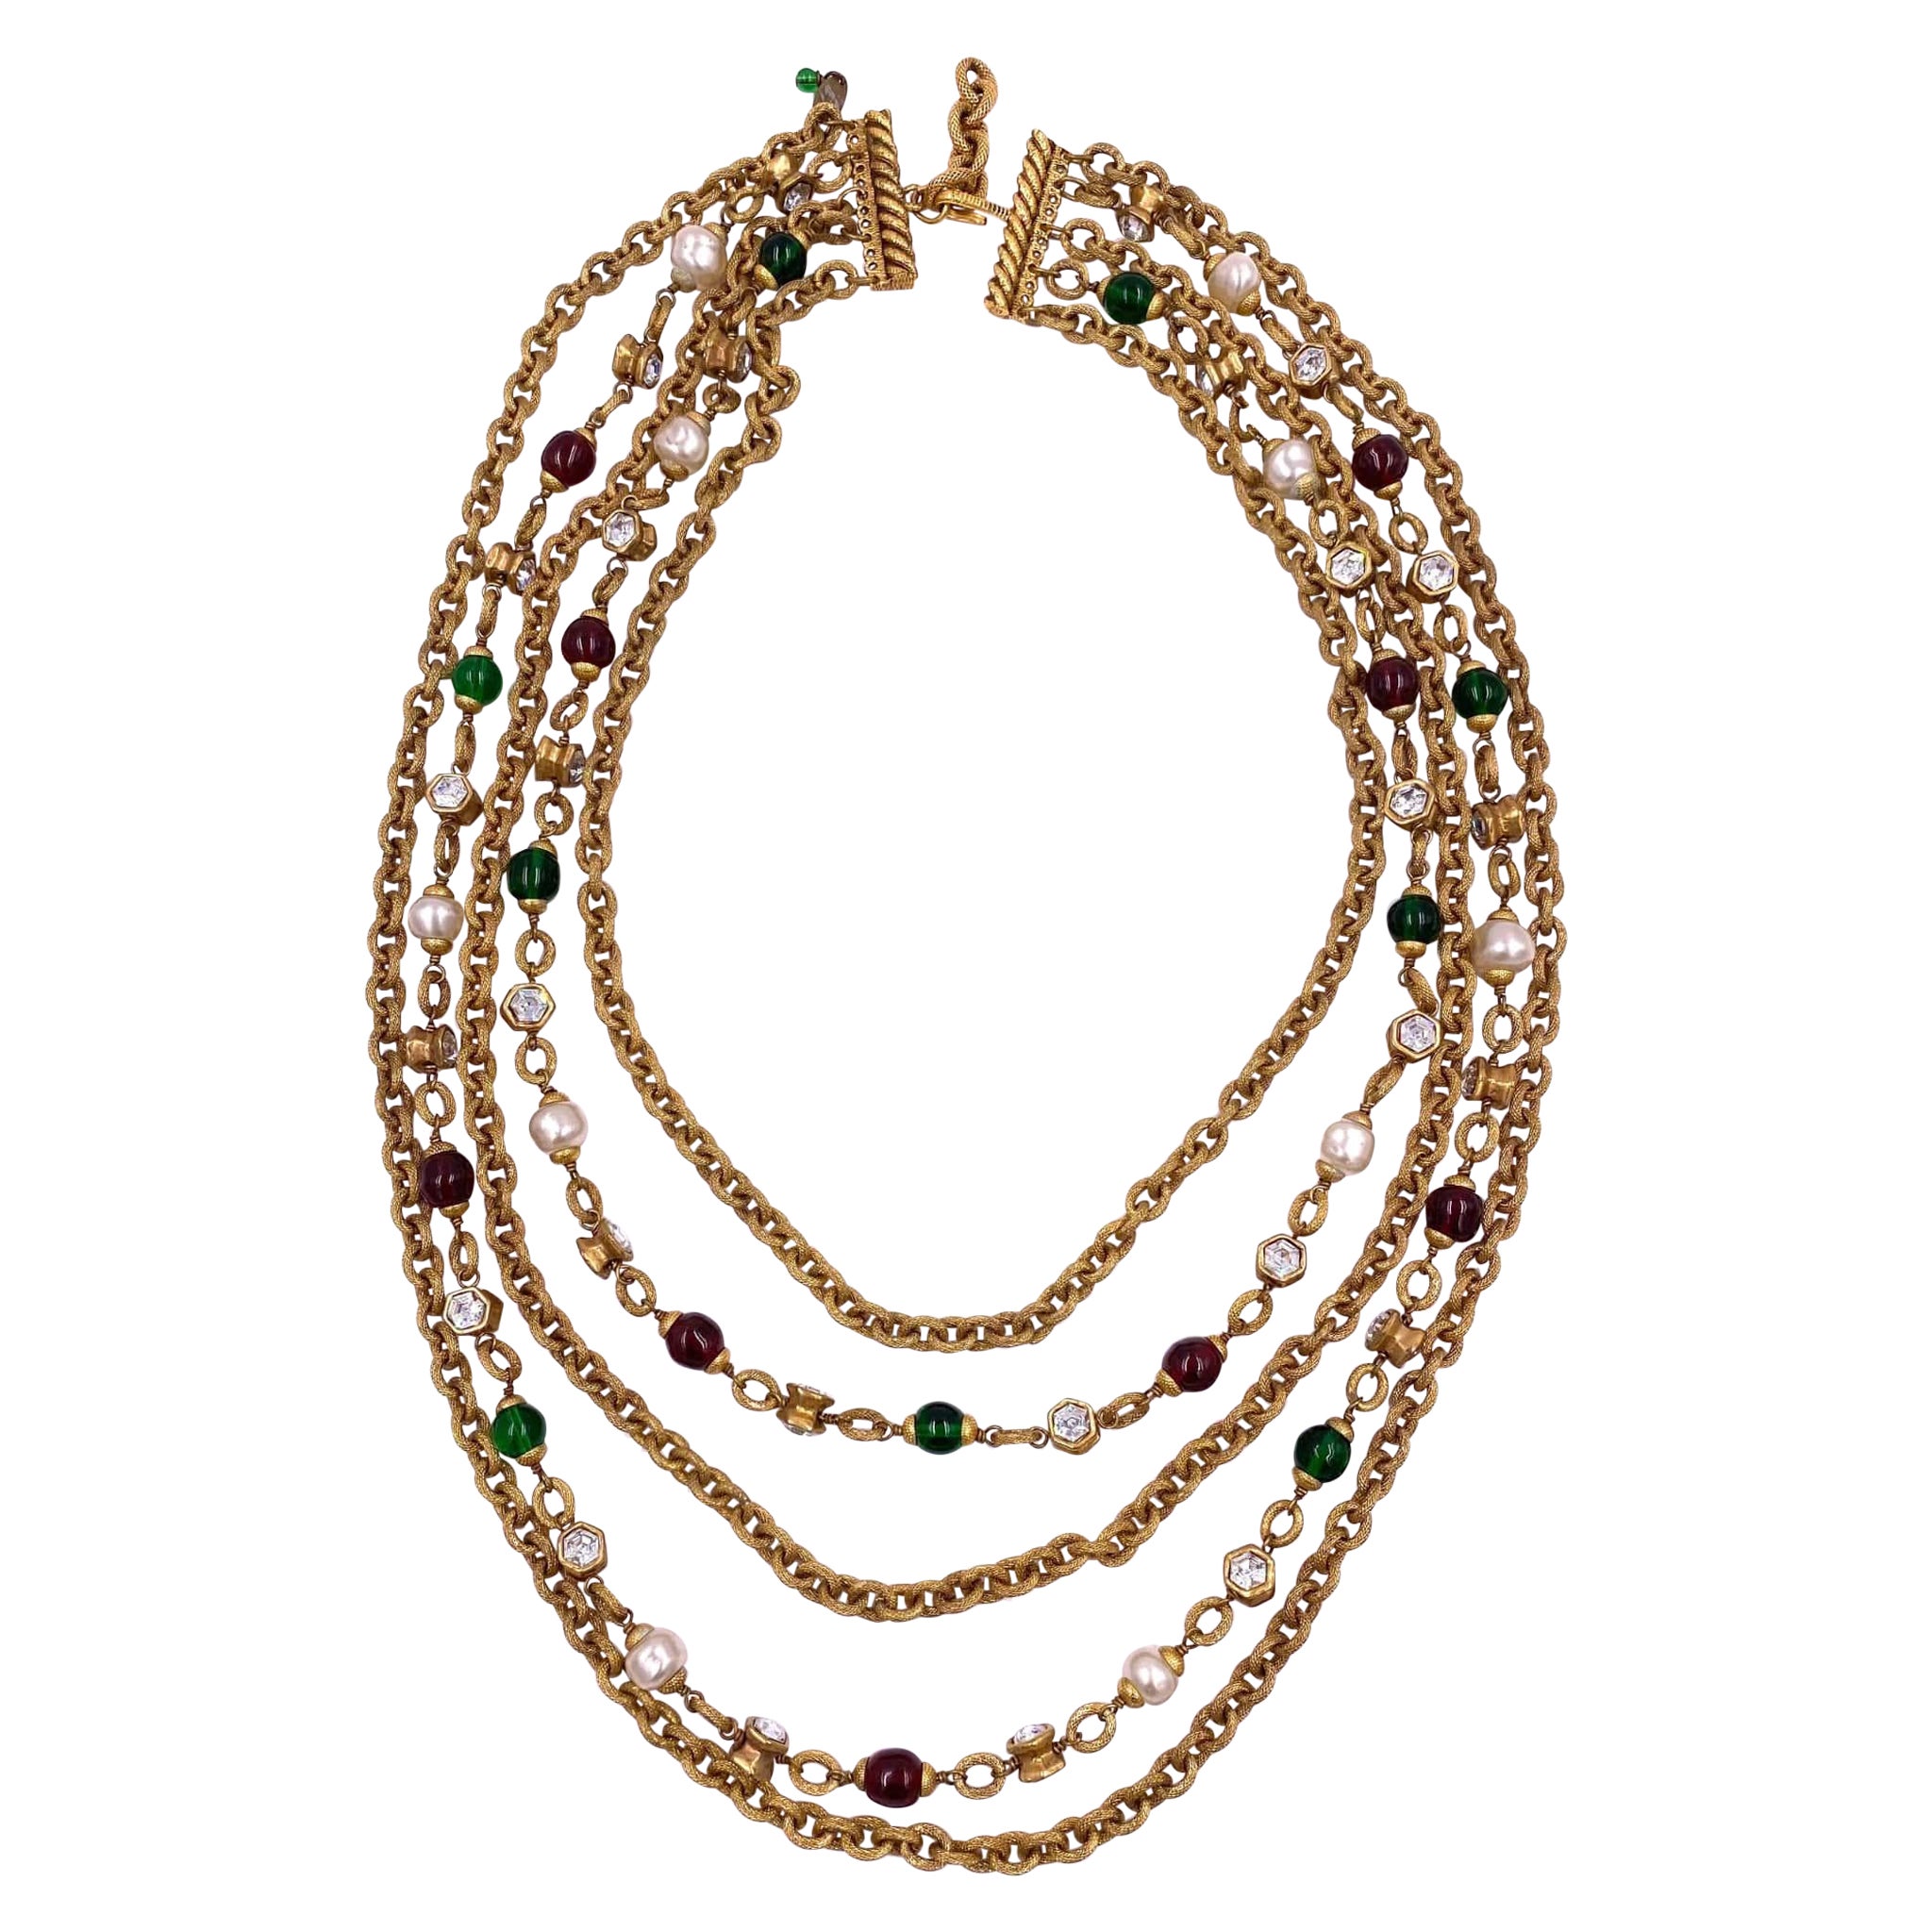 Chanel 1984 Multi Chain with Gripoix Purple/Green Stones Necklace For Sale